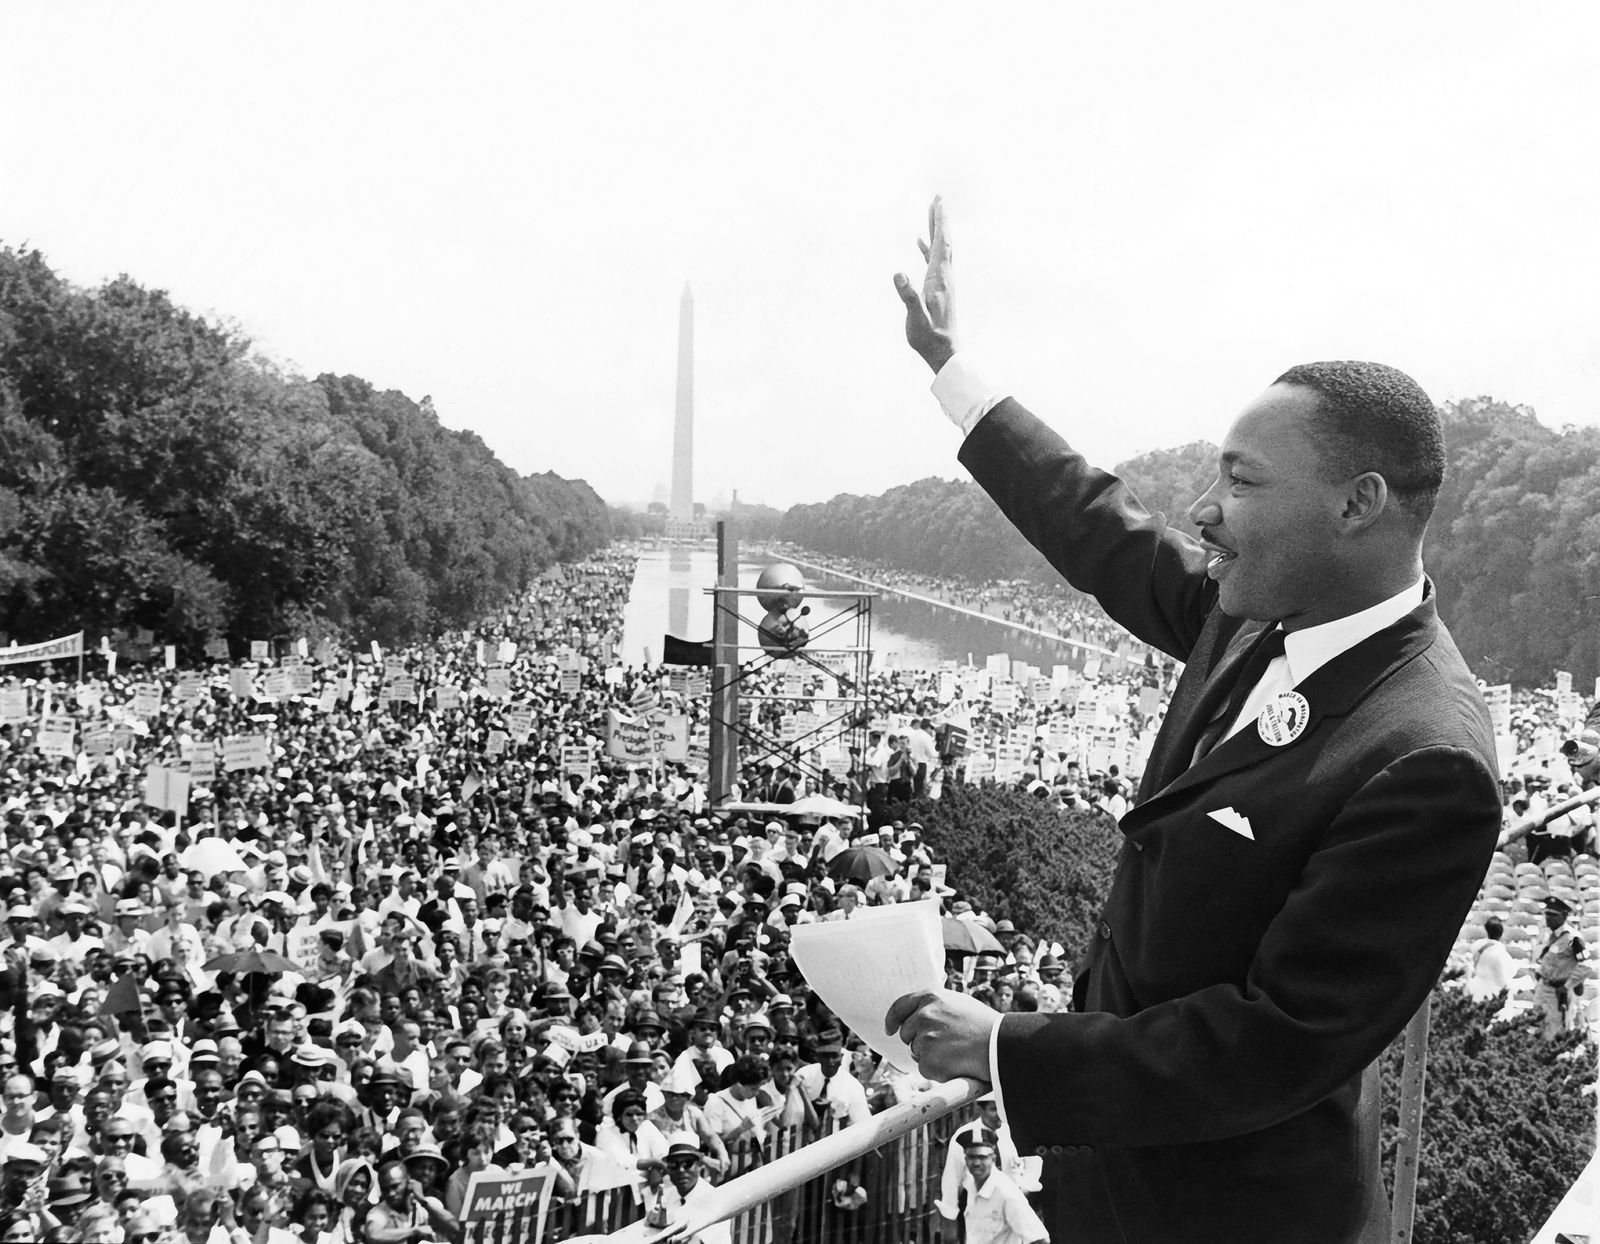 Martin Luther King Jr.'s Legacy 60 Years After the March on Washington